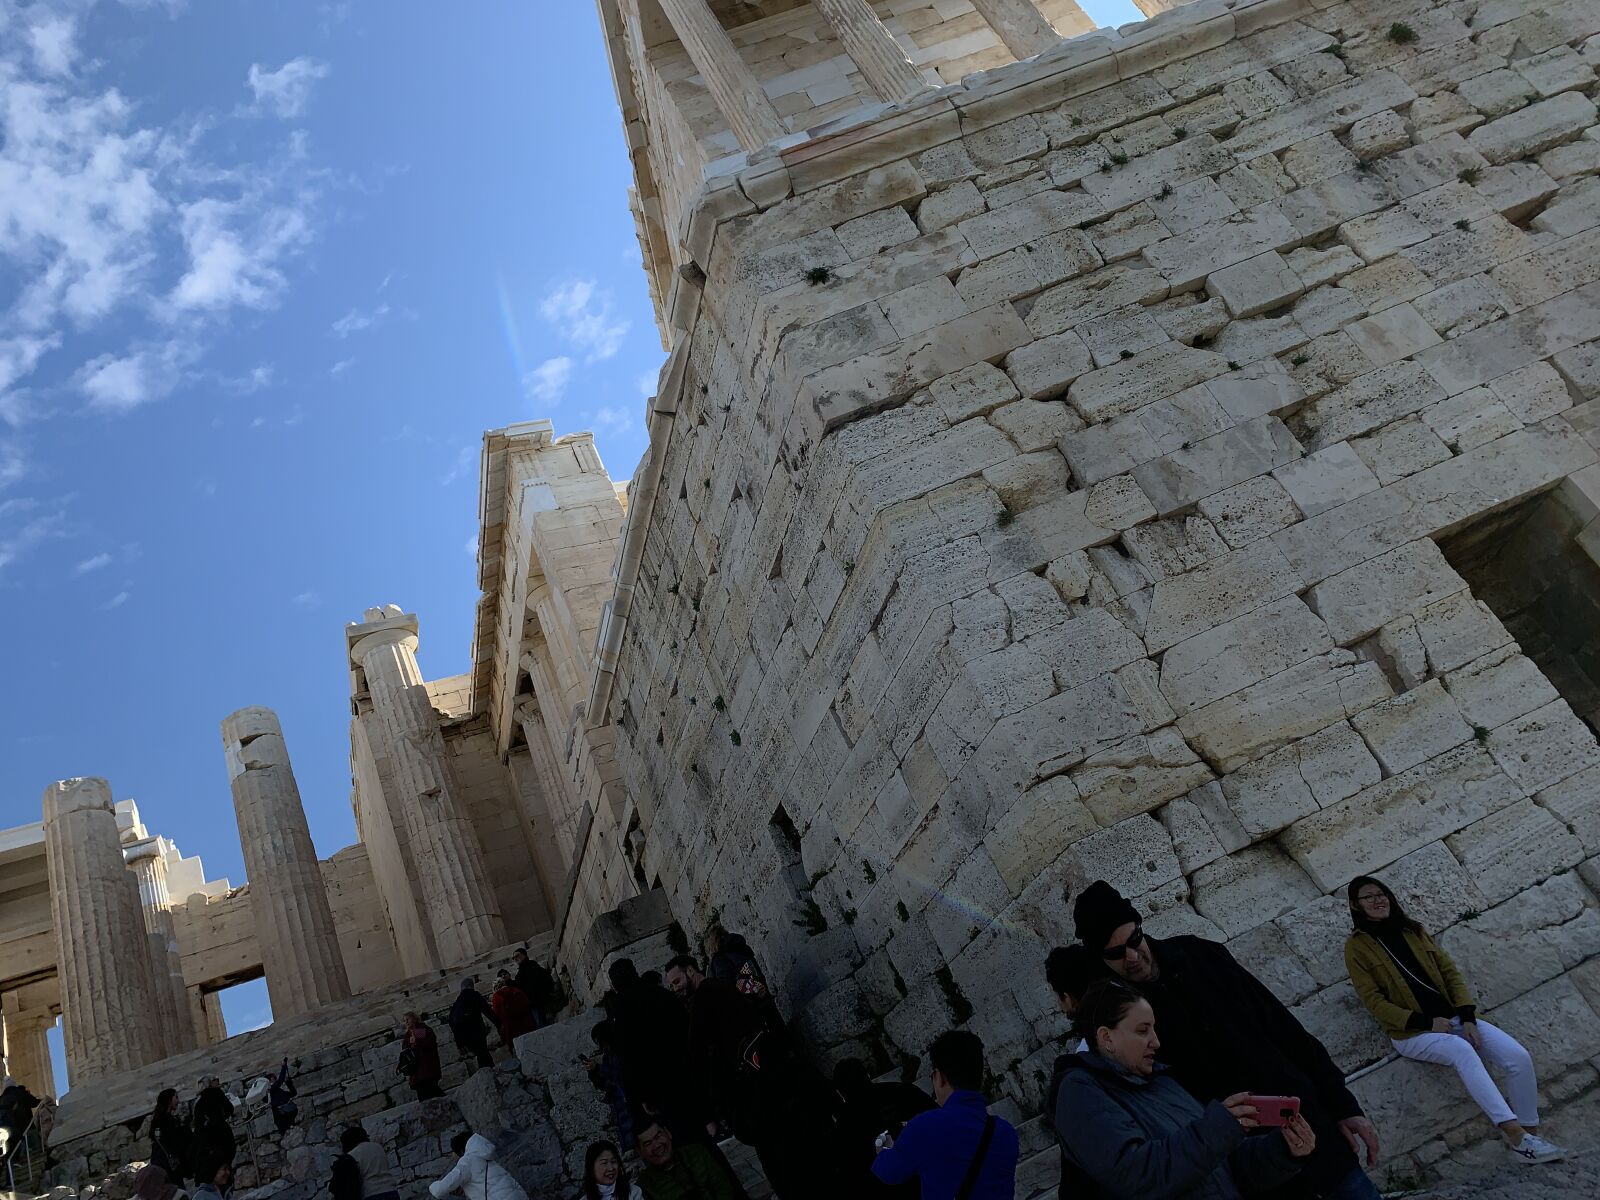 Apple iPhone XS Max + iPhone XS Max back camera 4.25mm f/1.8 sample photo. Travel, greece, building photography